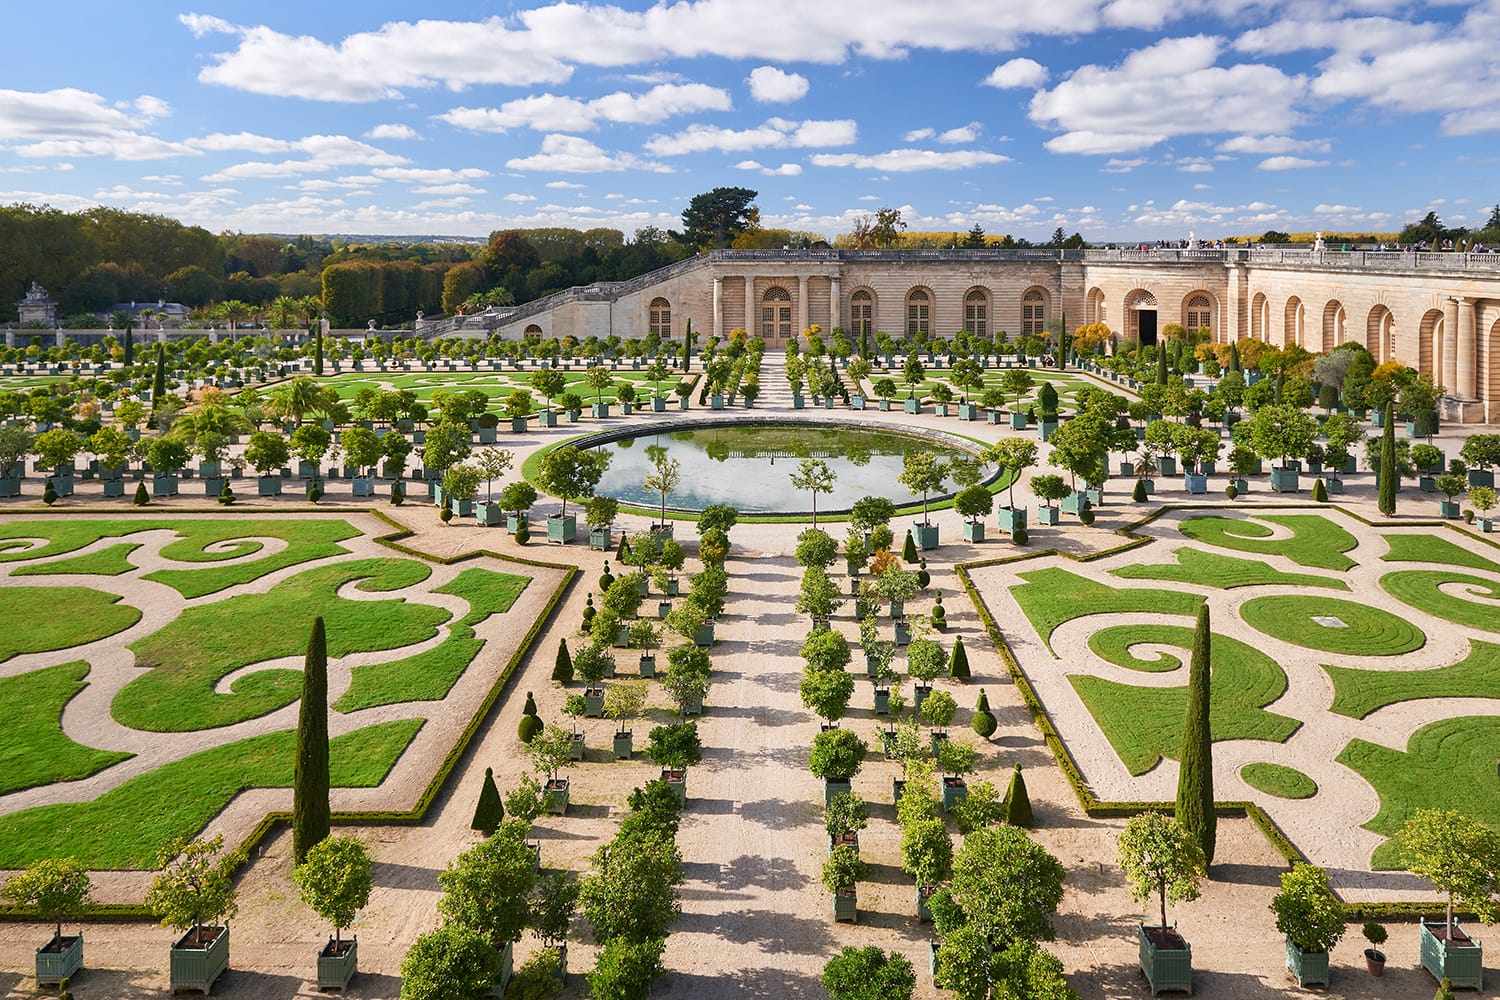 Versailles in Île-de-France region, renowned worldwide for its château, the Château de Versailles and the gardens of Versailles.